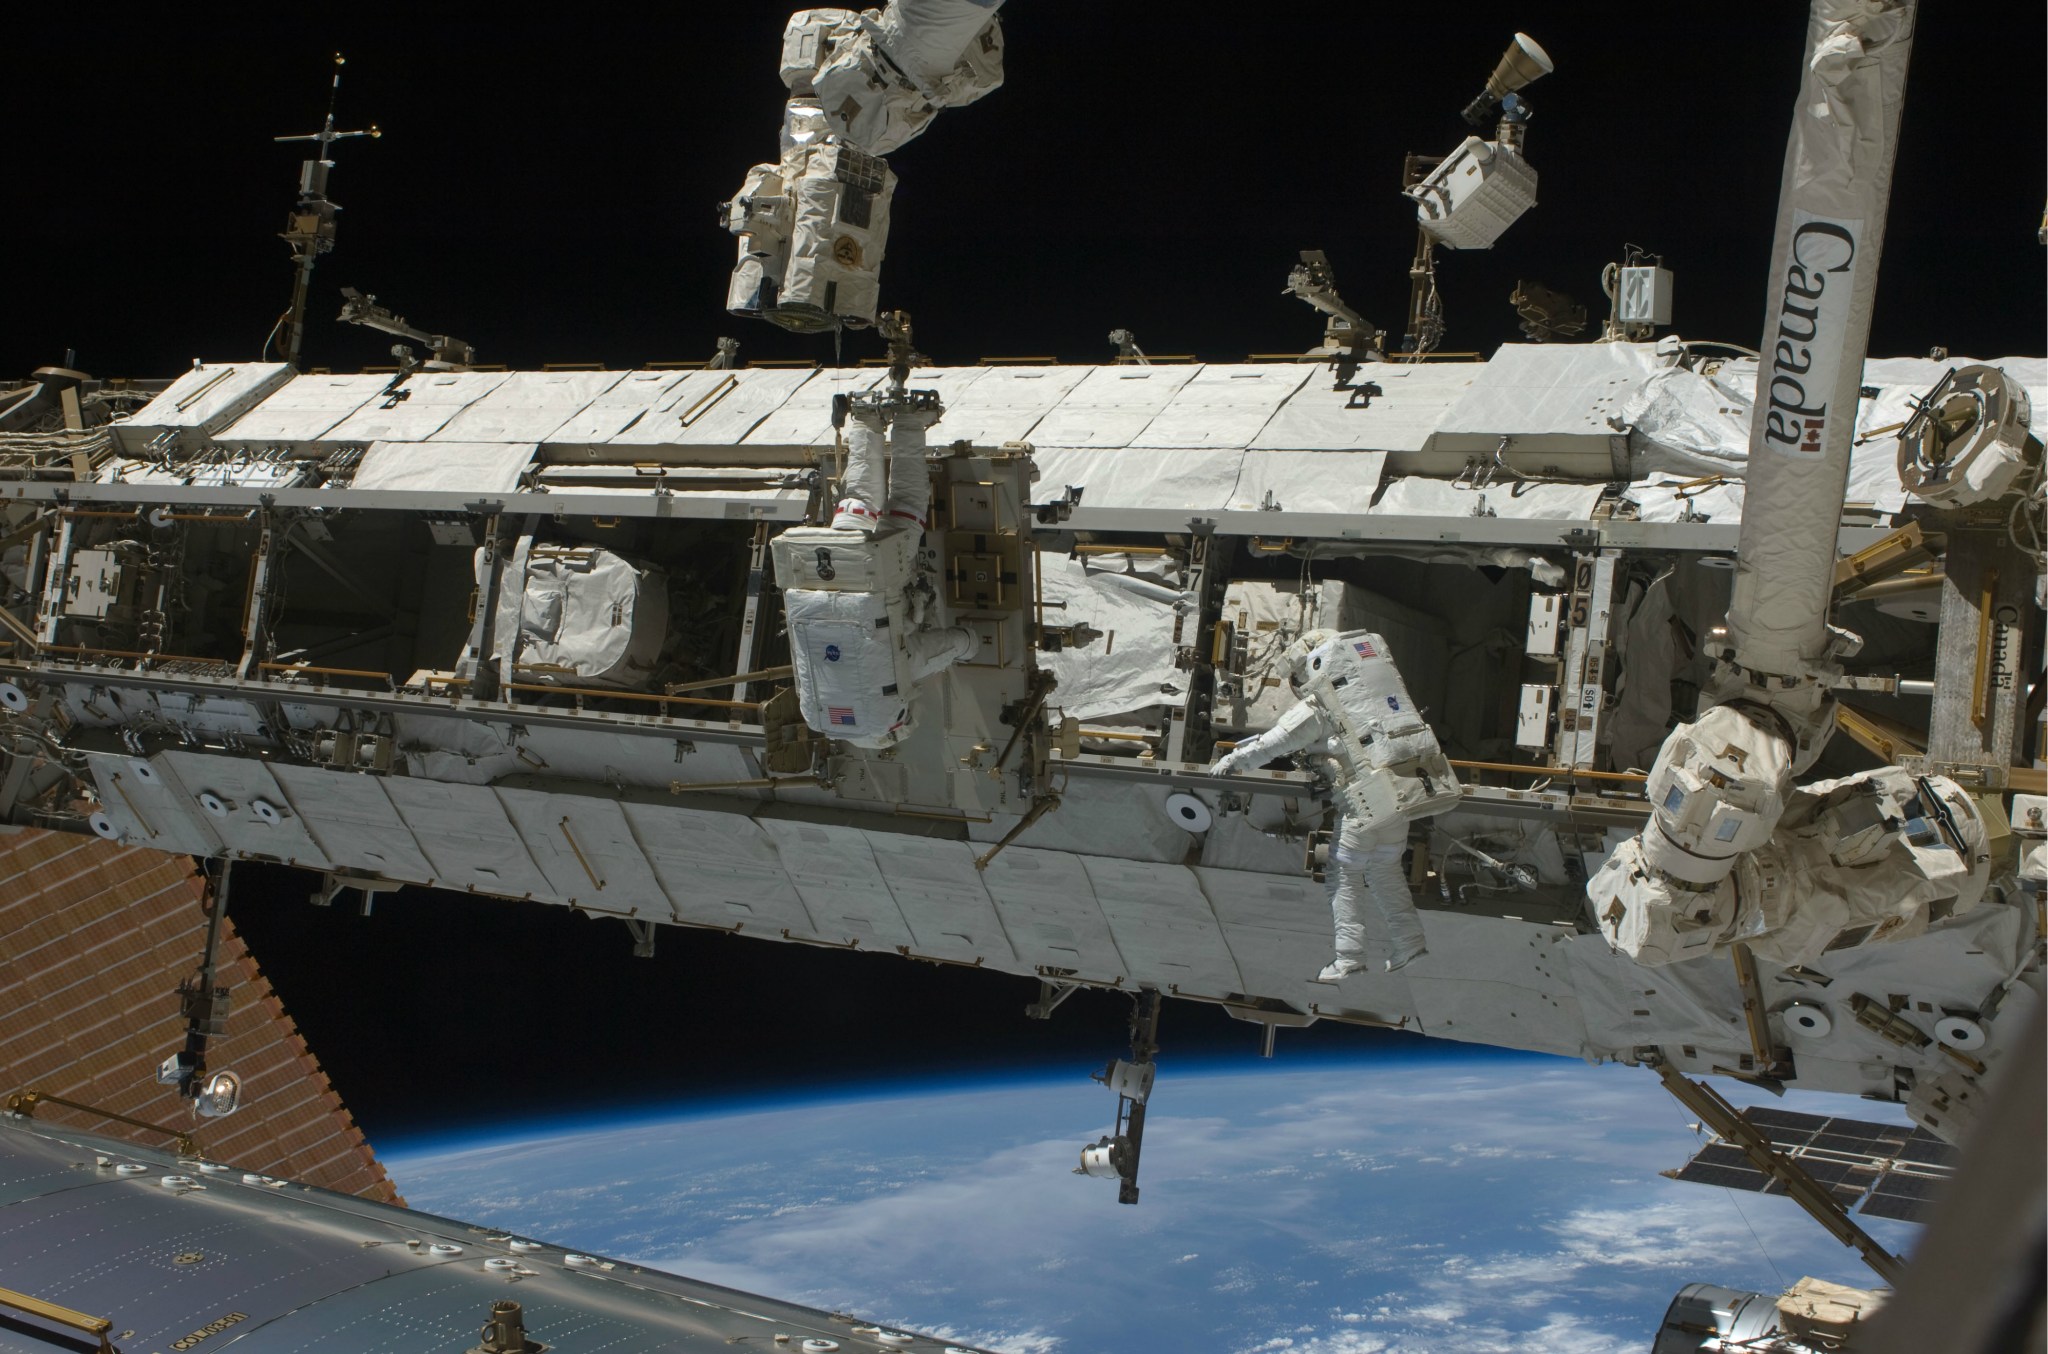 NASA astronauts Joe Acaba, left, and Ricky Arnold conduct a spacewalk in March 2009.